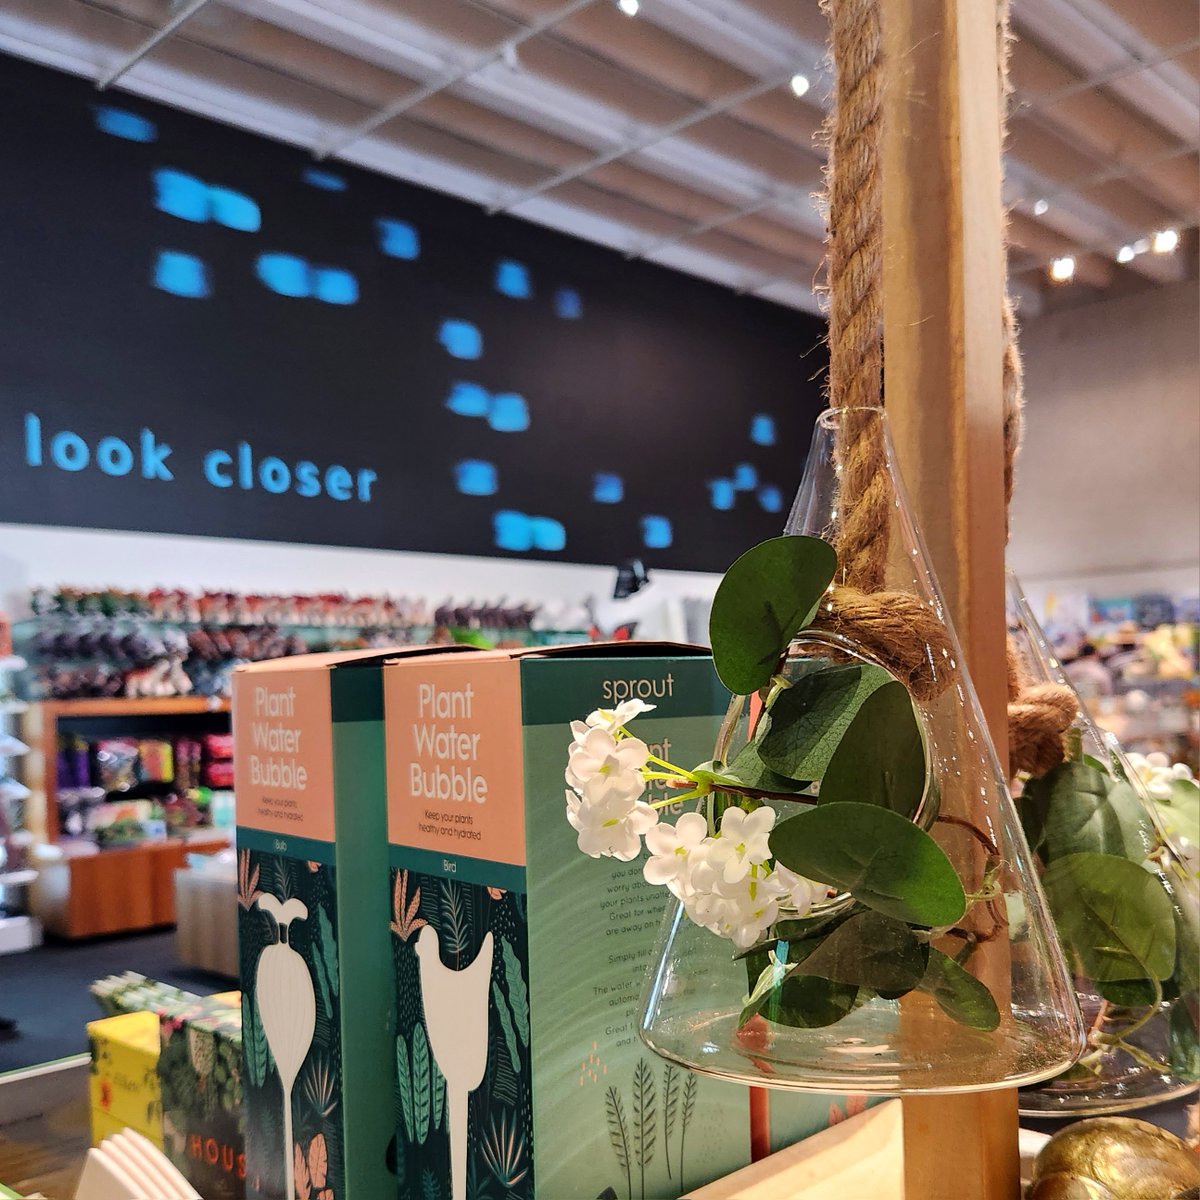 Left #MothersDay shopping to the last minute? No worries, your secret's safe with us! Swing by the QM Shop for all your #LastMinuteGift needs & let us help you make Mum feel truly cherished – after all, she deserves it! 💝 Open daily from 9:30am – 5pm on Level 2 of #QMkurilpa.